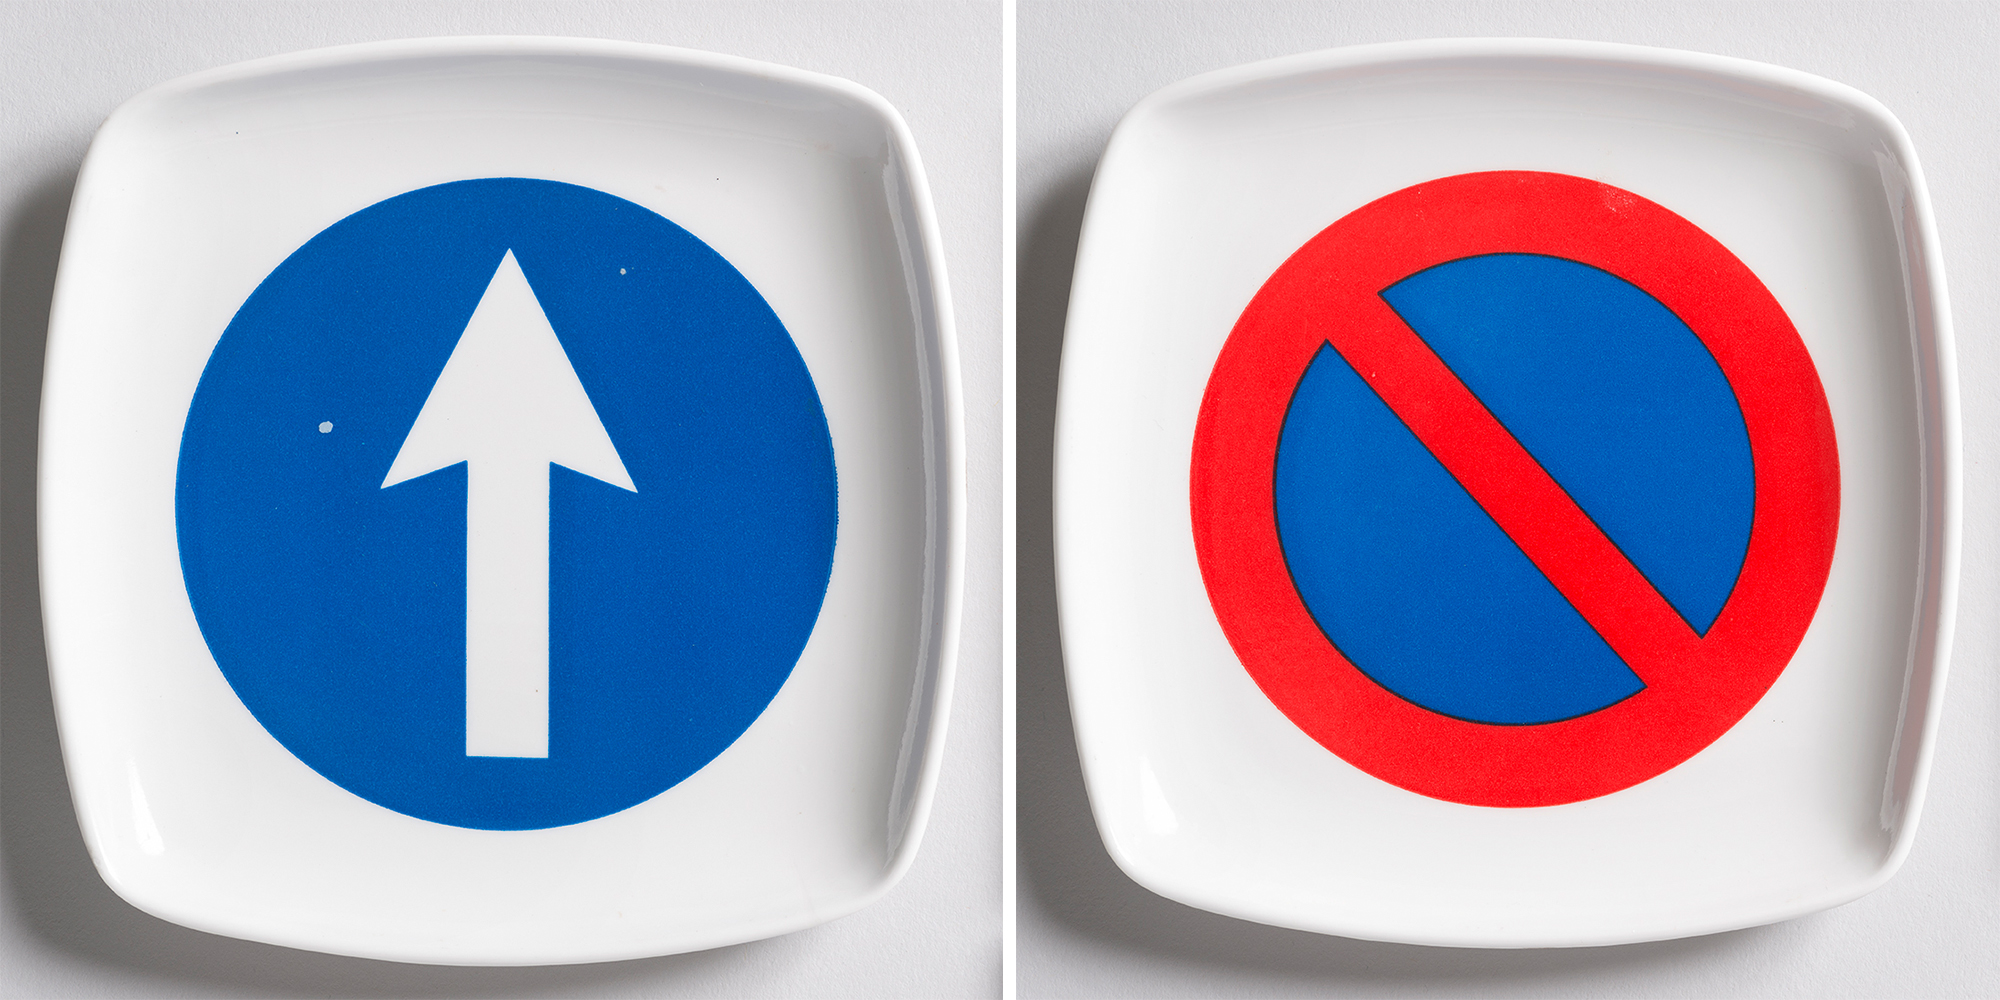 Side-by-side images of two rounded-square with ashtrays. One features a blue circle with an upward-pointing white arrow in it; the other features the 